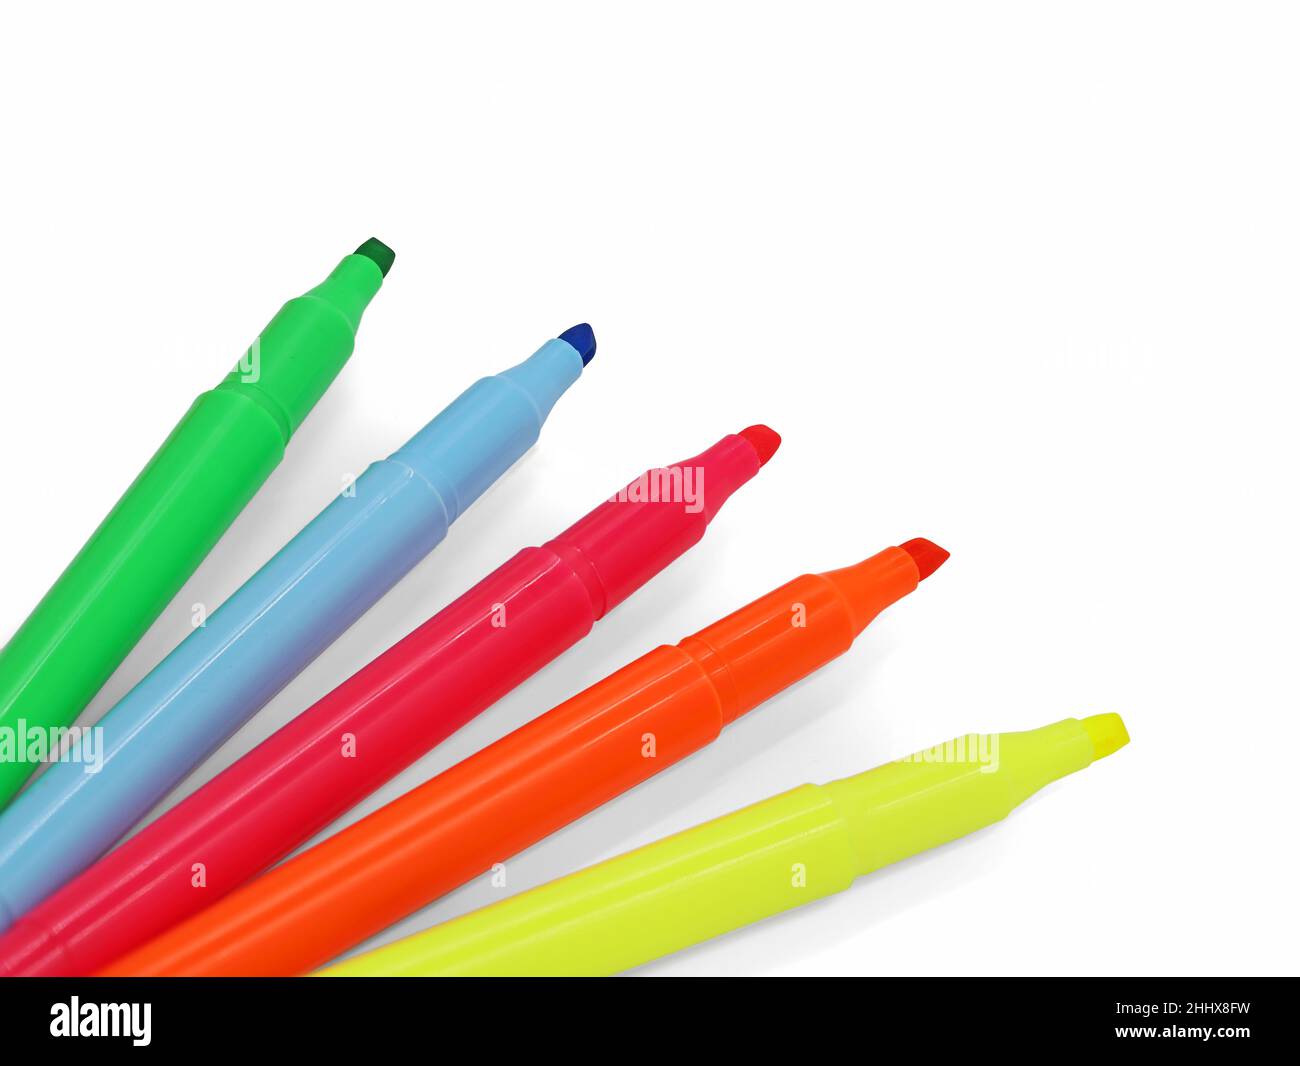 https://c8.alamy.com/comp/2HHX8FW/neon-multicolored-highlighter-marker-pens-isolated-on-white-background-2HHX8FW.jpg